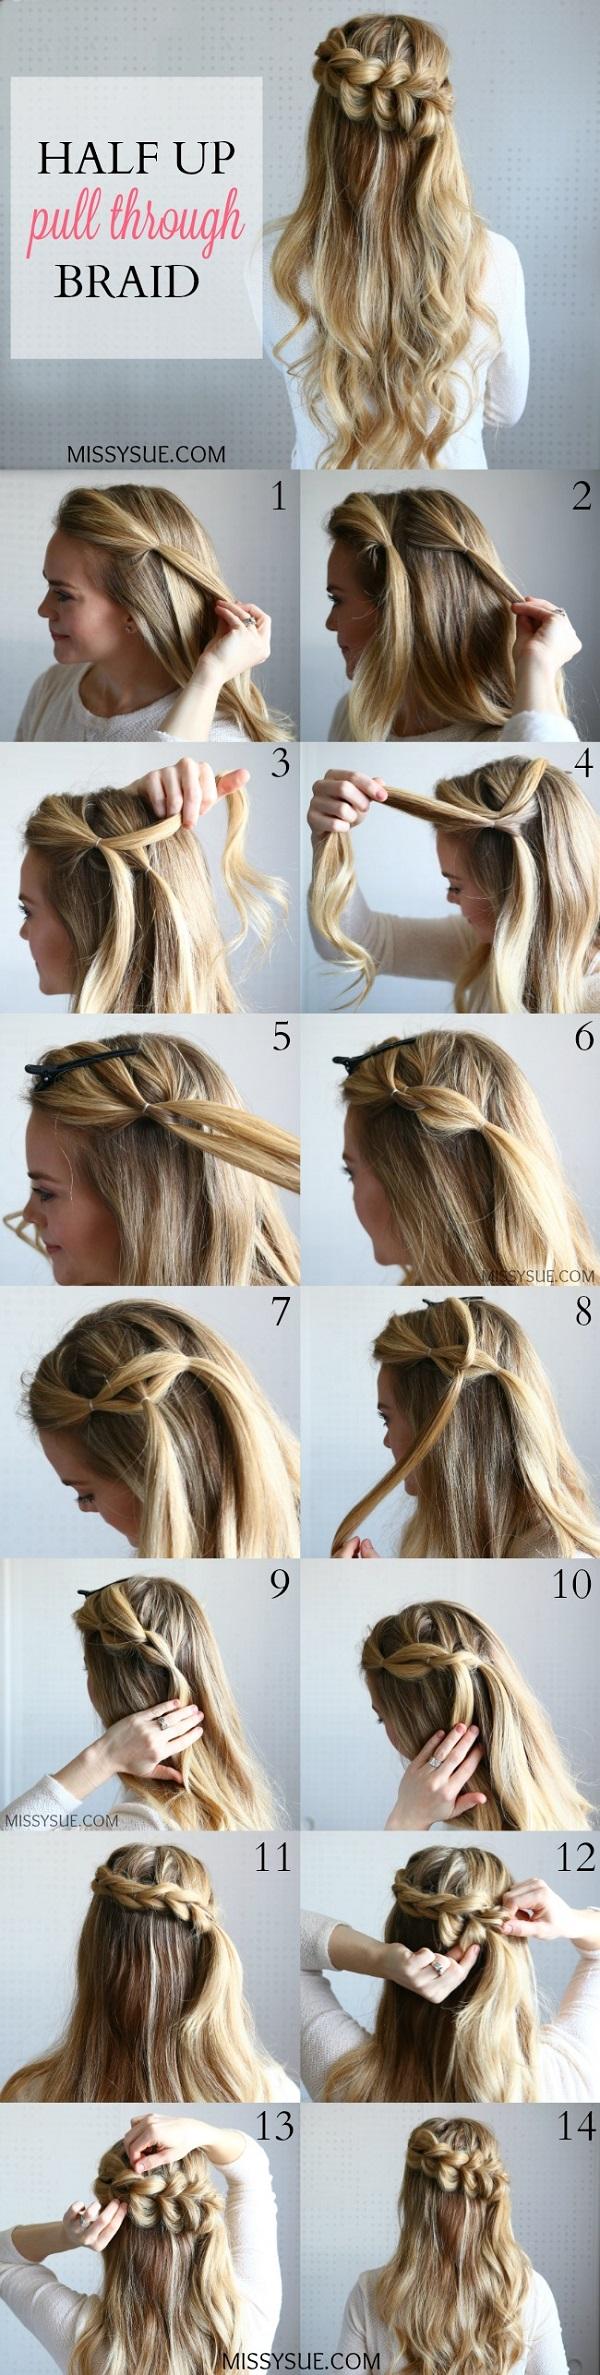 25 Easy Hairstyles for long hair | Cuded